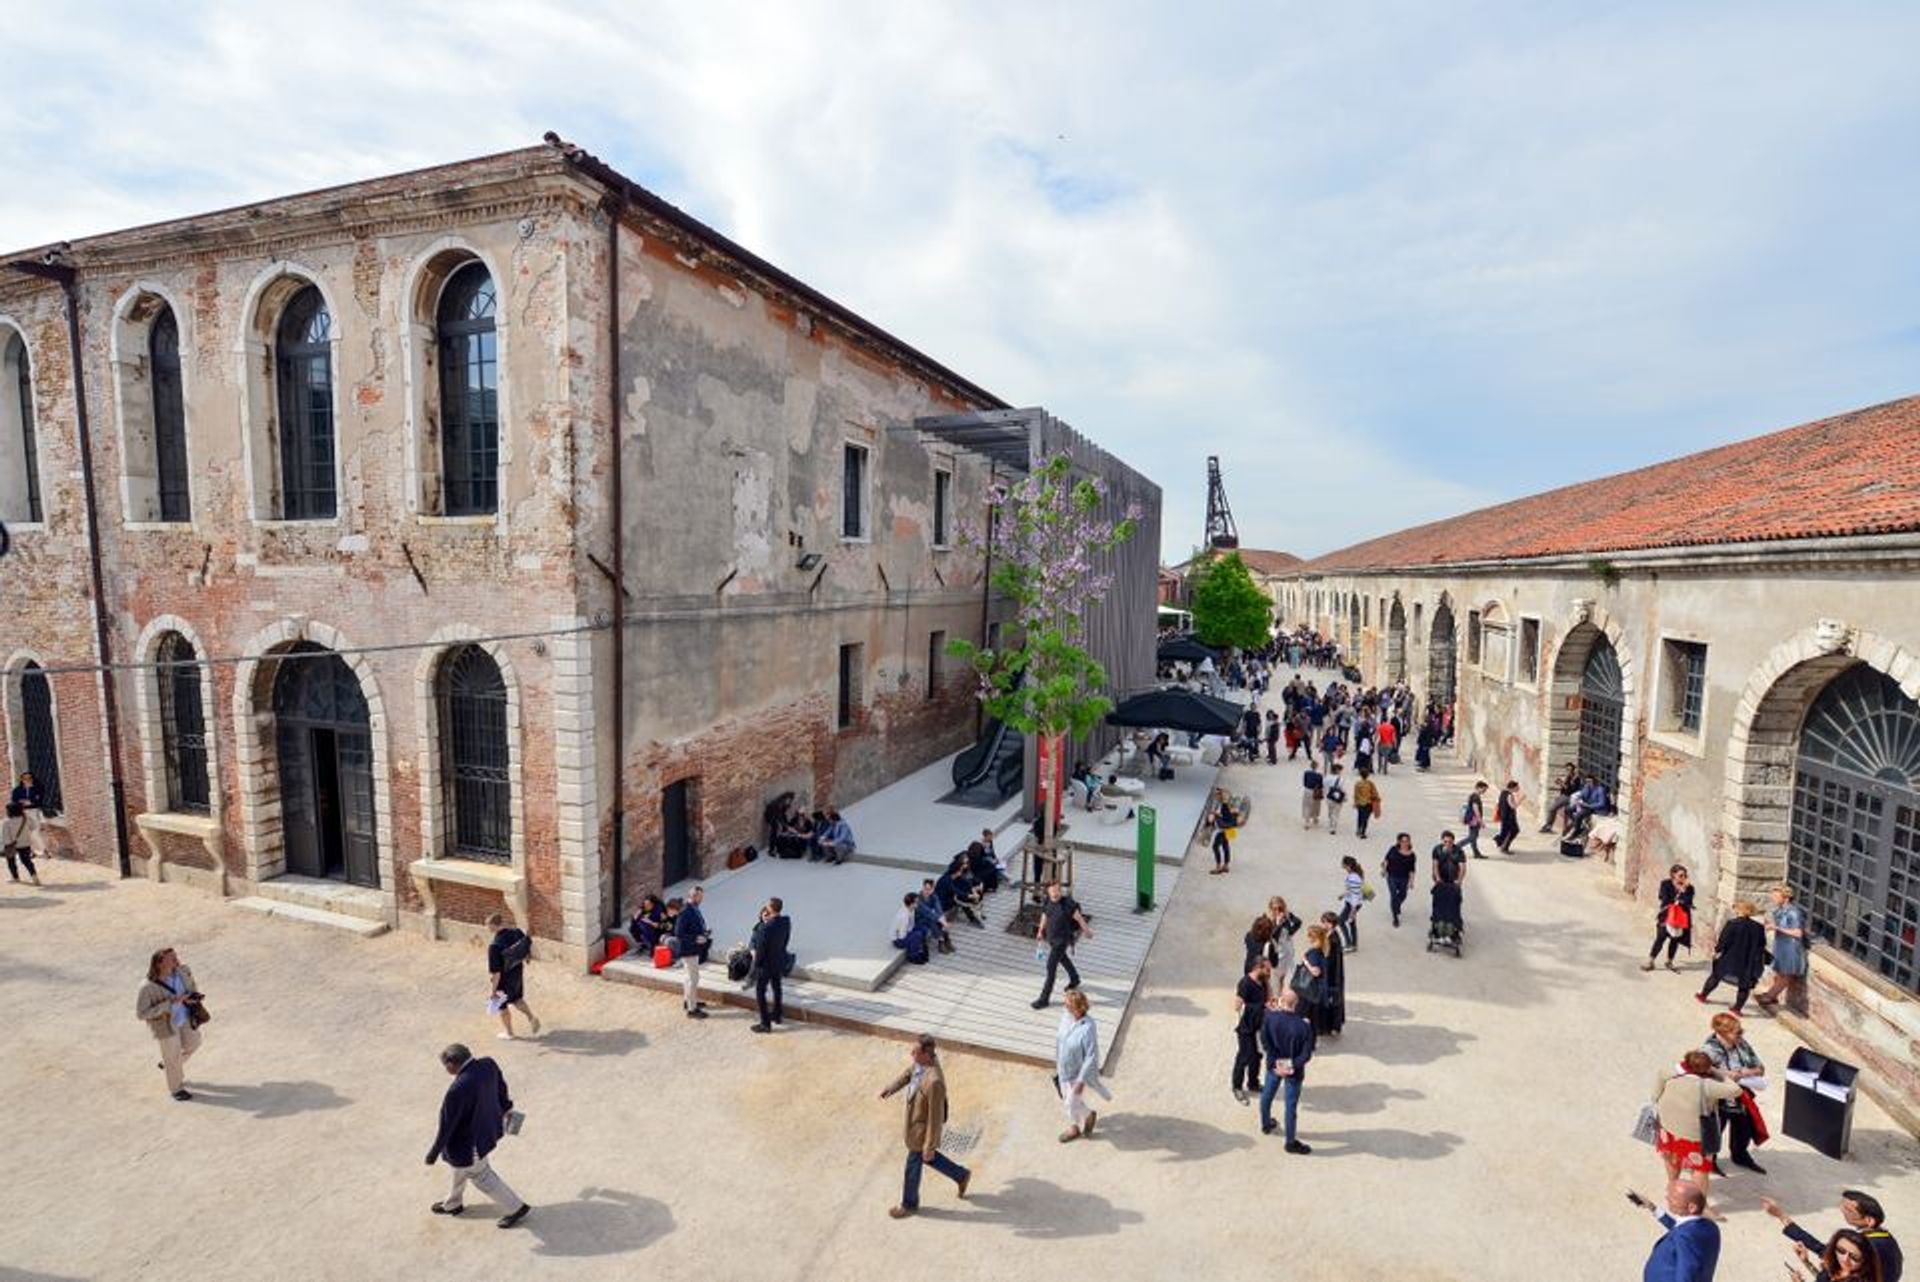 Paolo Baratta's leadership boosted visitor numbers to the Venice Biennale from under 200,000 in 1999 to a high of 620,000 in 2017 Photo: Andrea Avezzù. Courtesy La Biennale di Venezia